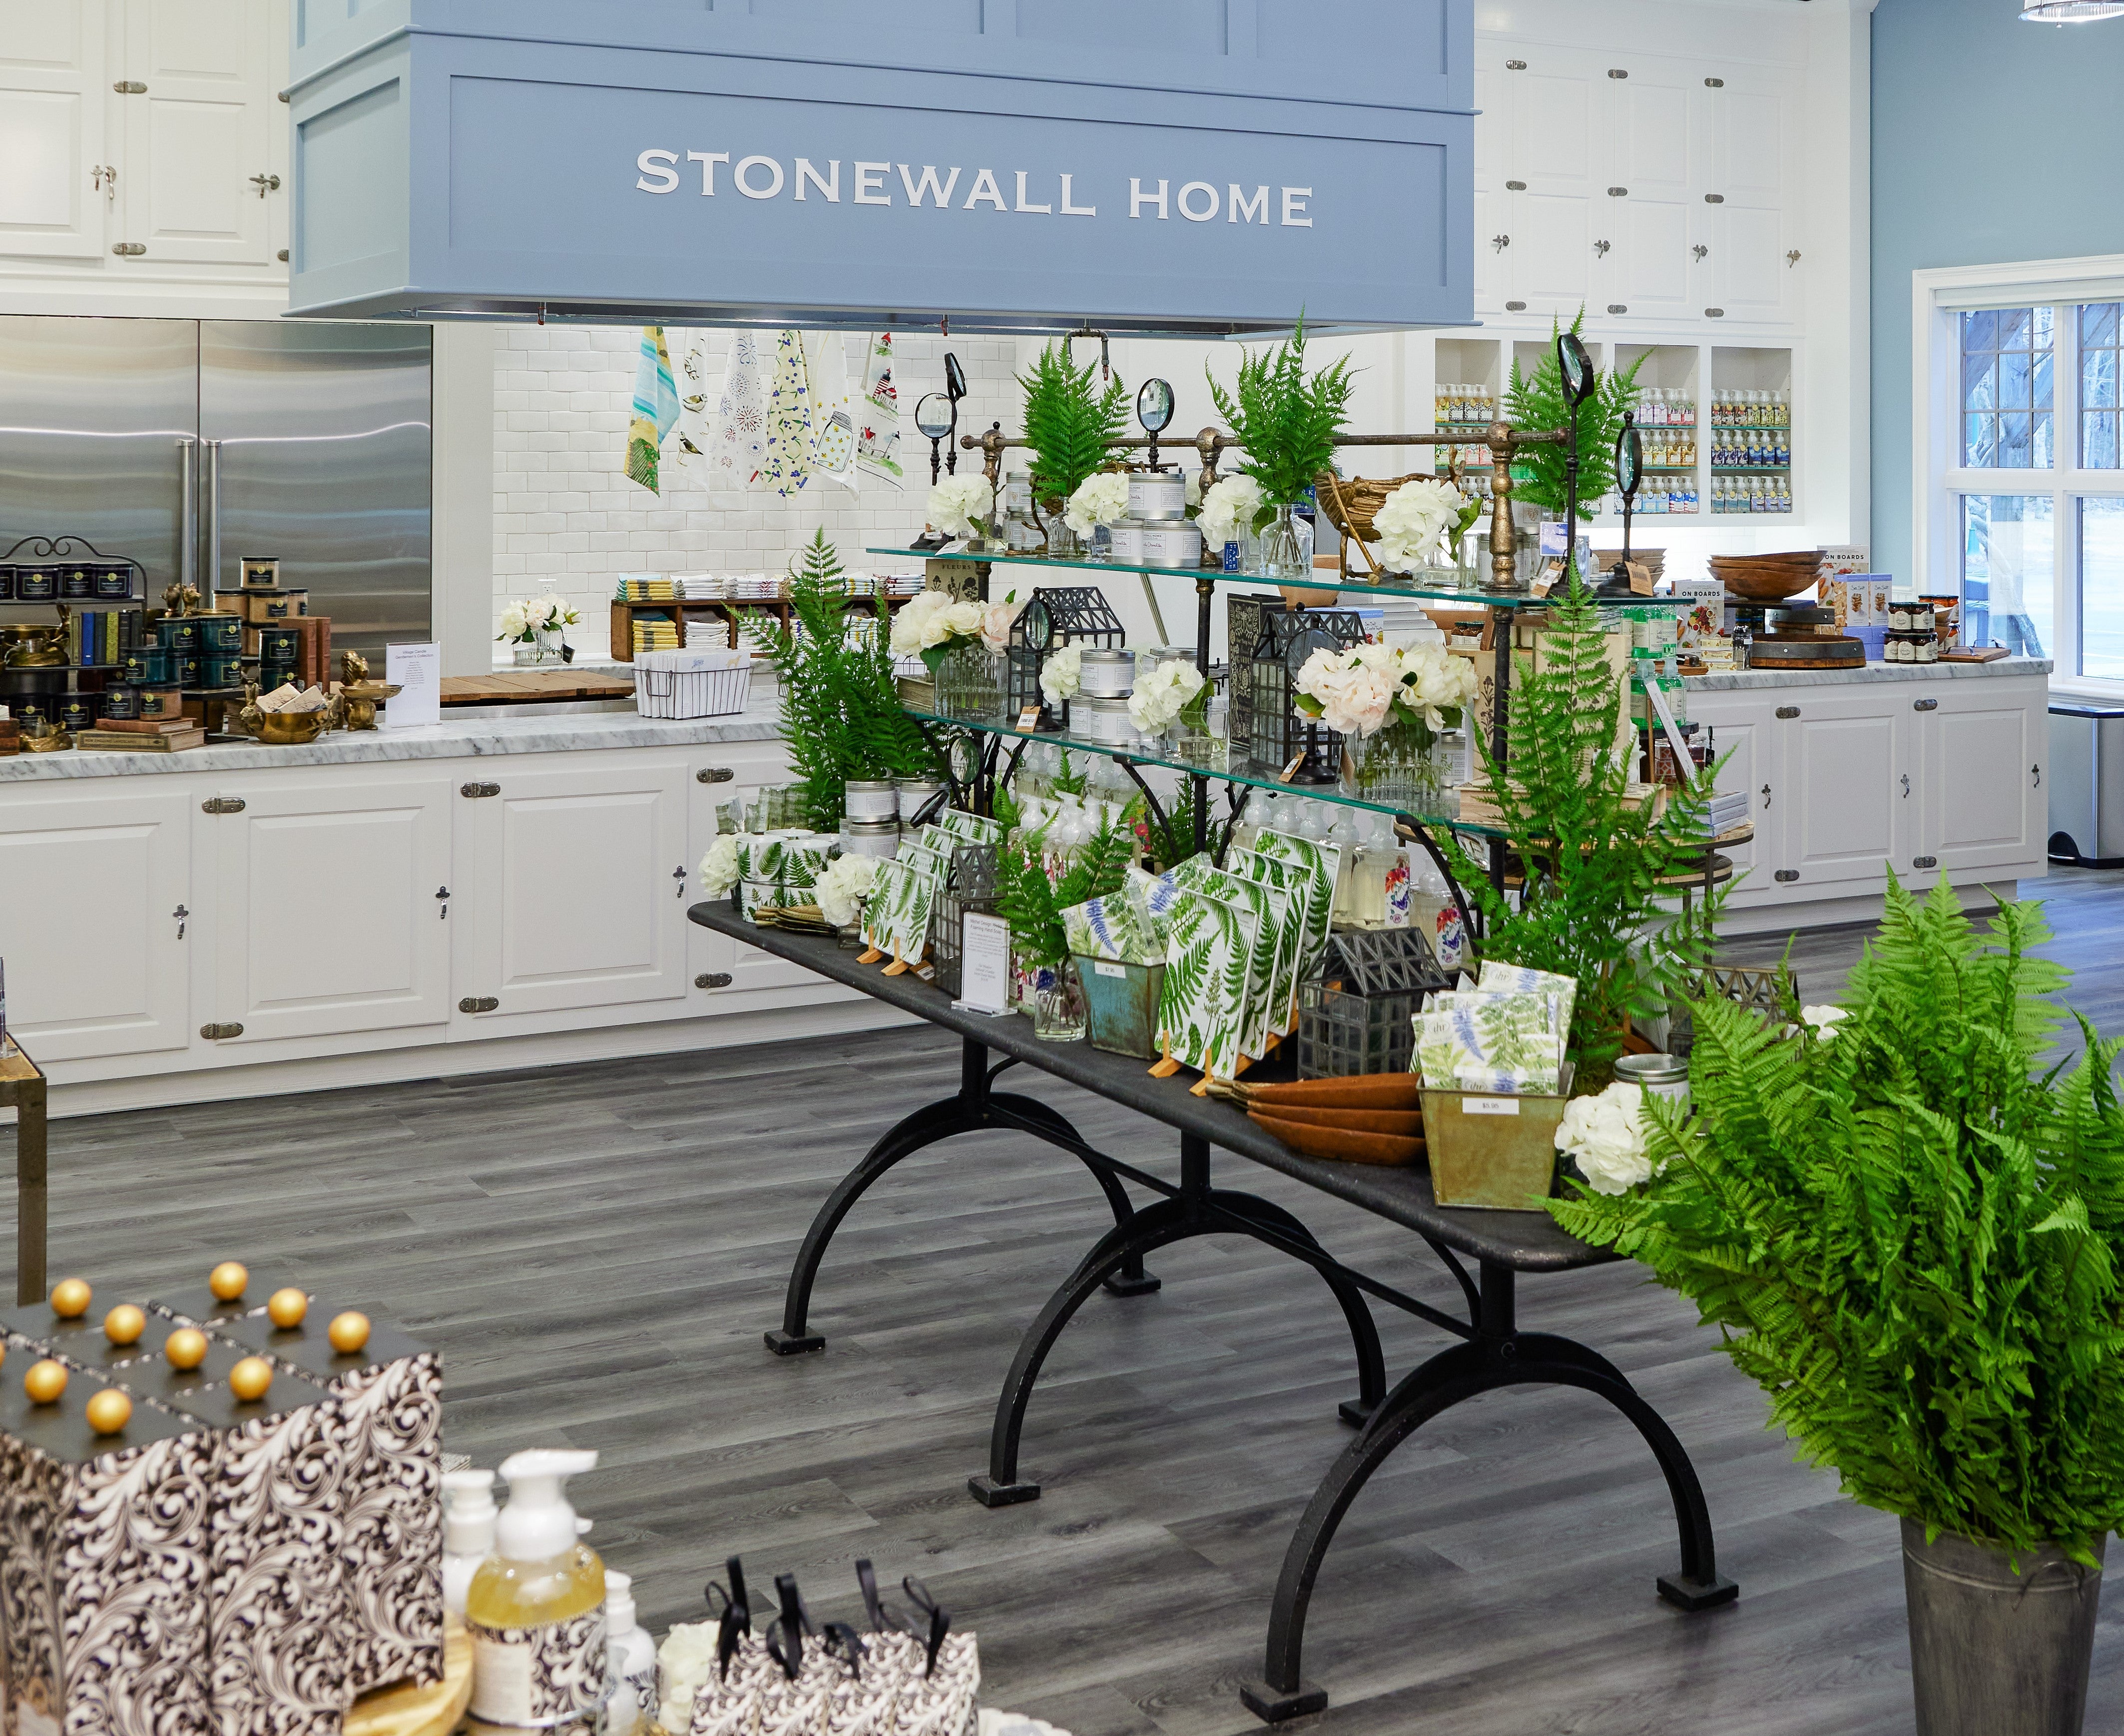 With company store, Stonewall Kitchen moves beyond ‘kitchen’ to encompass ‘home’